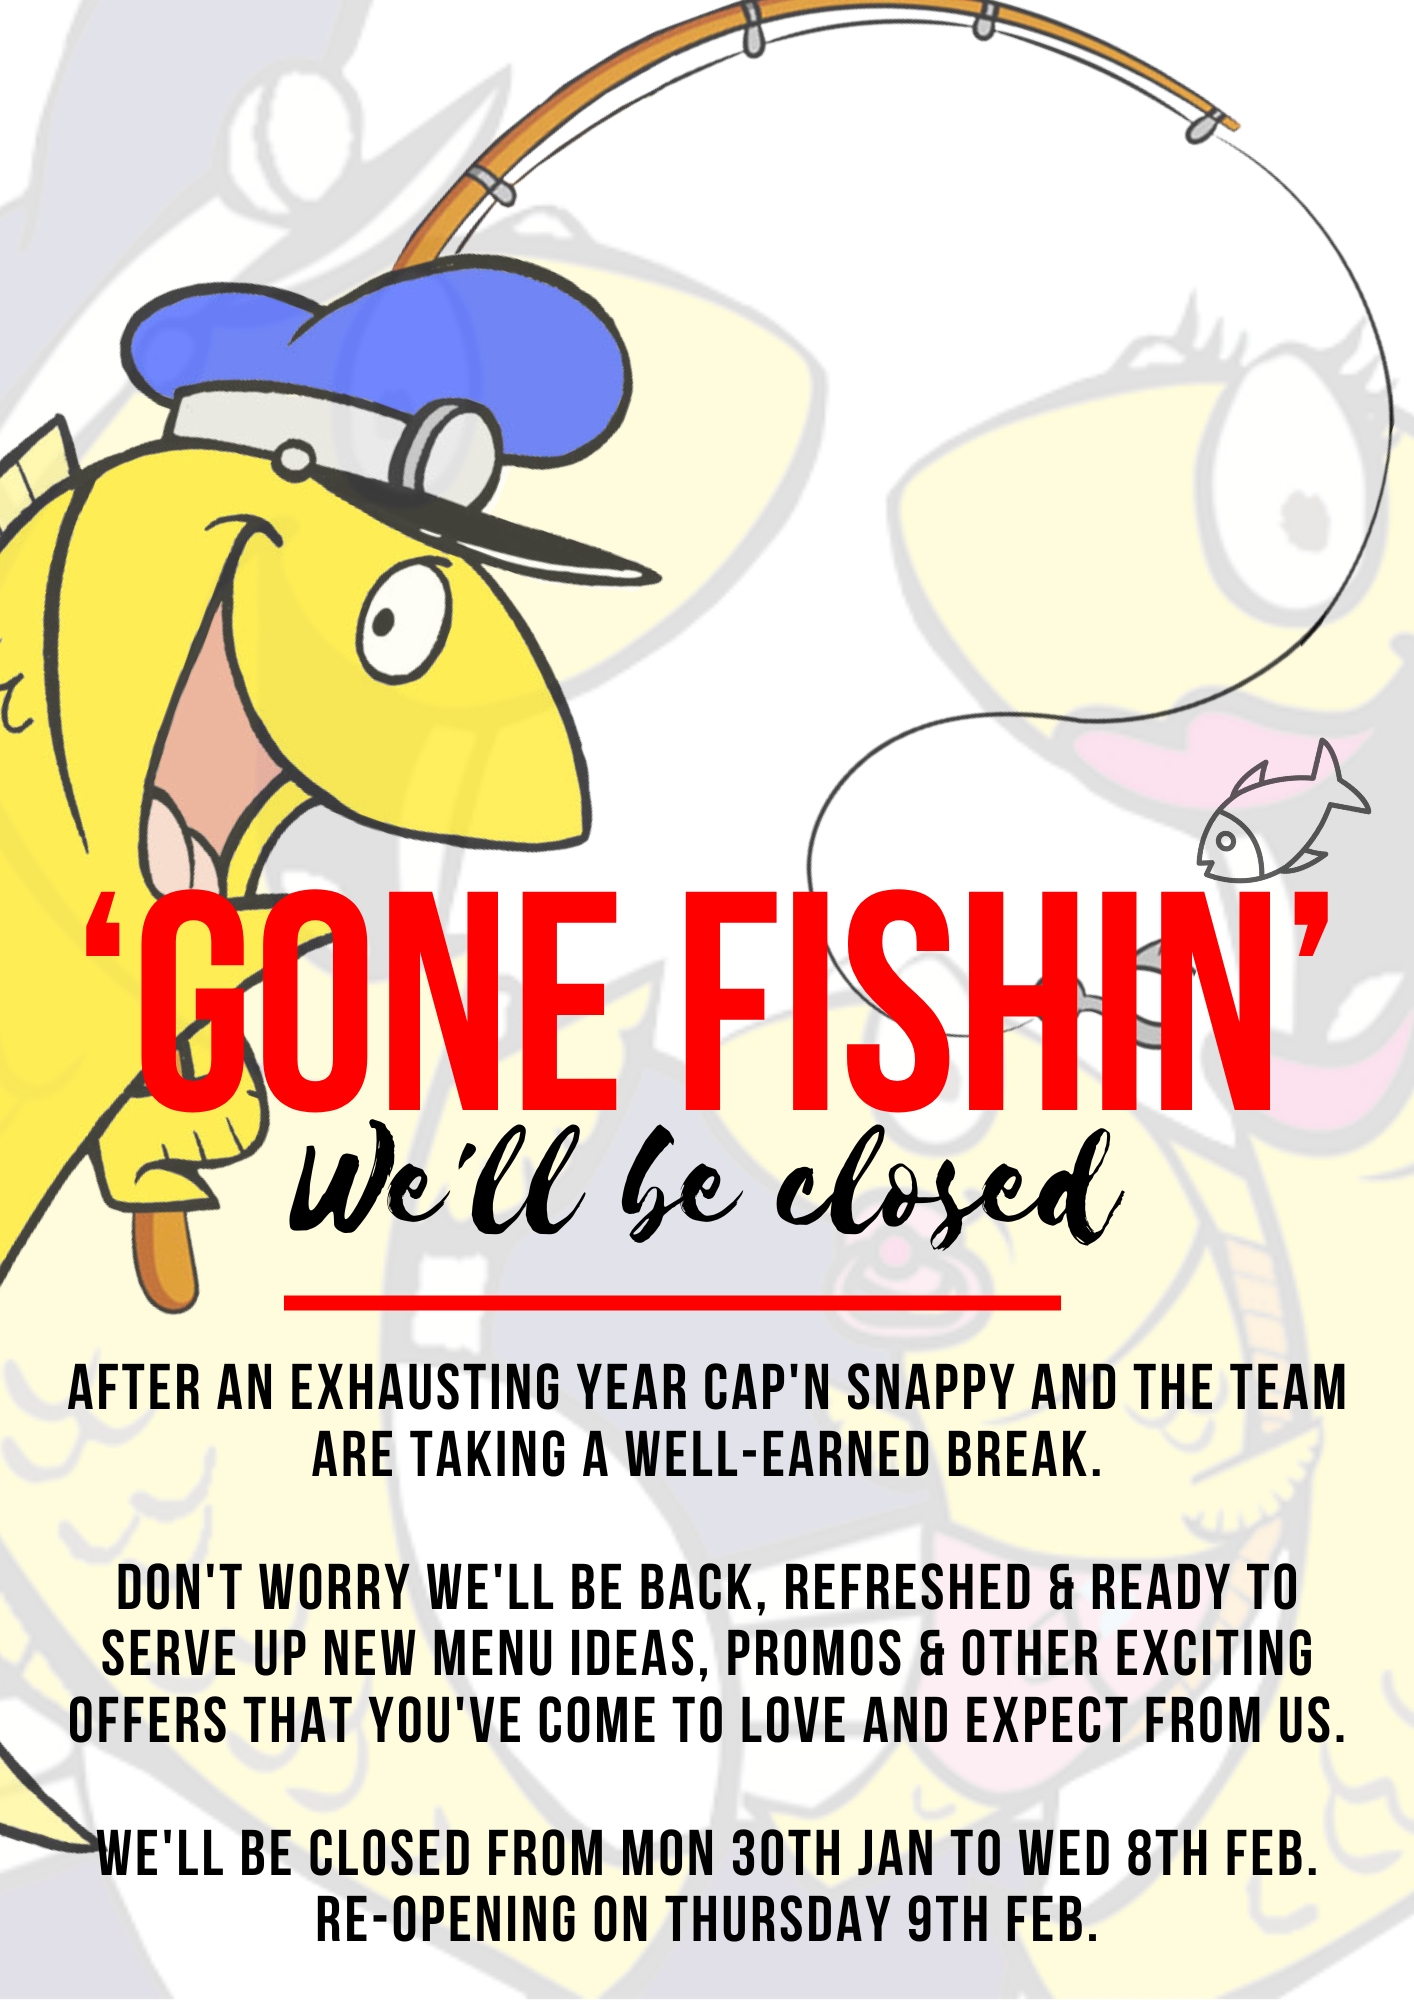 We've gone fishin' - closed from 30th Jan to 8th Feb 2